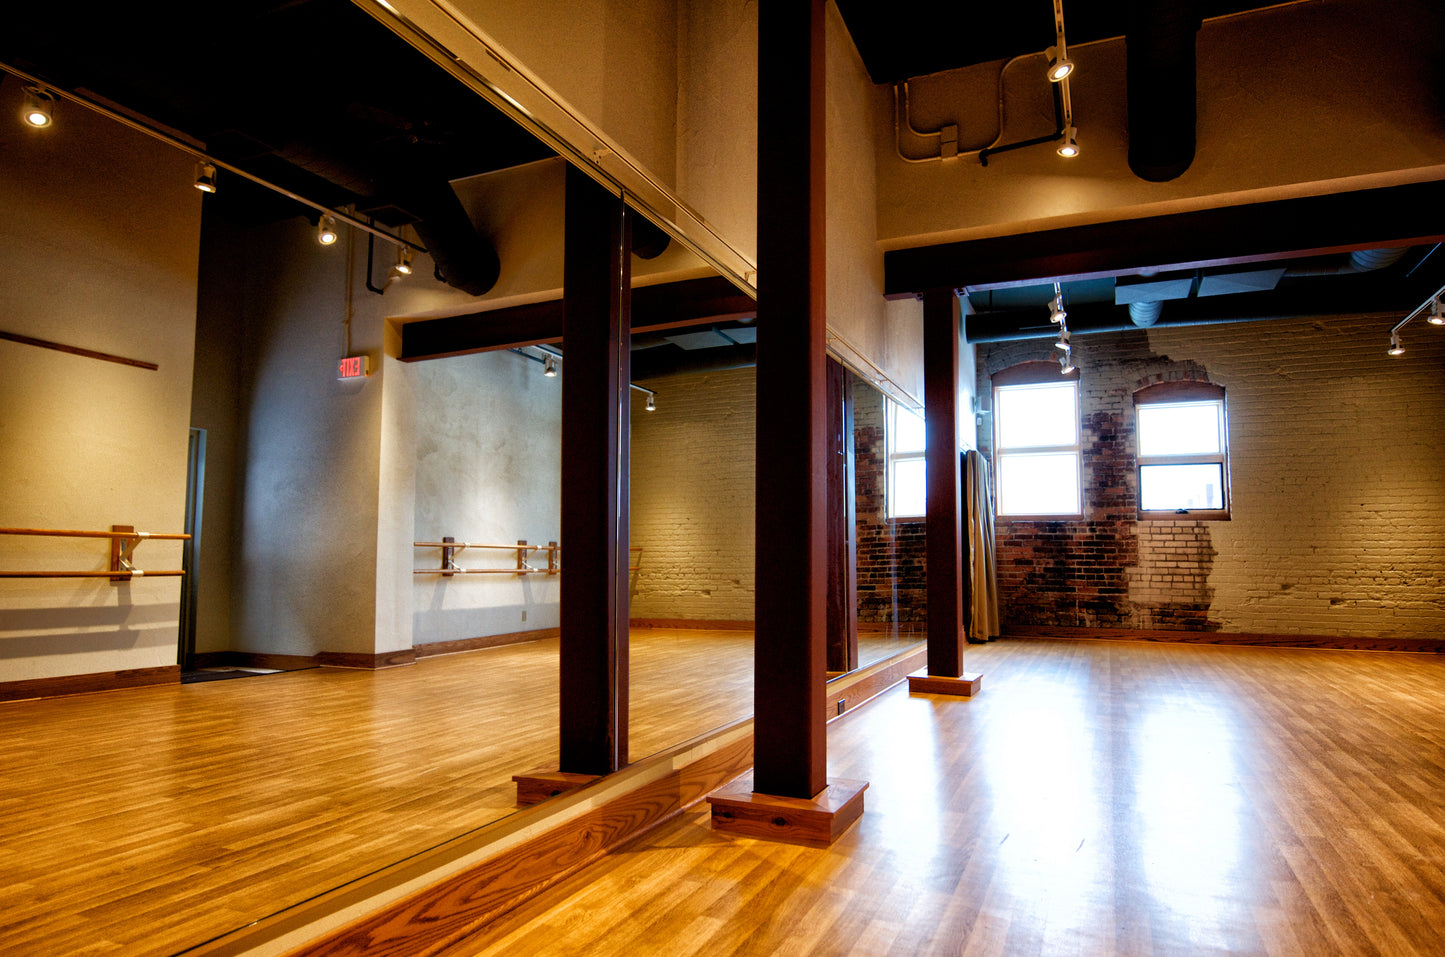 Studio Rental for Dance and Photography